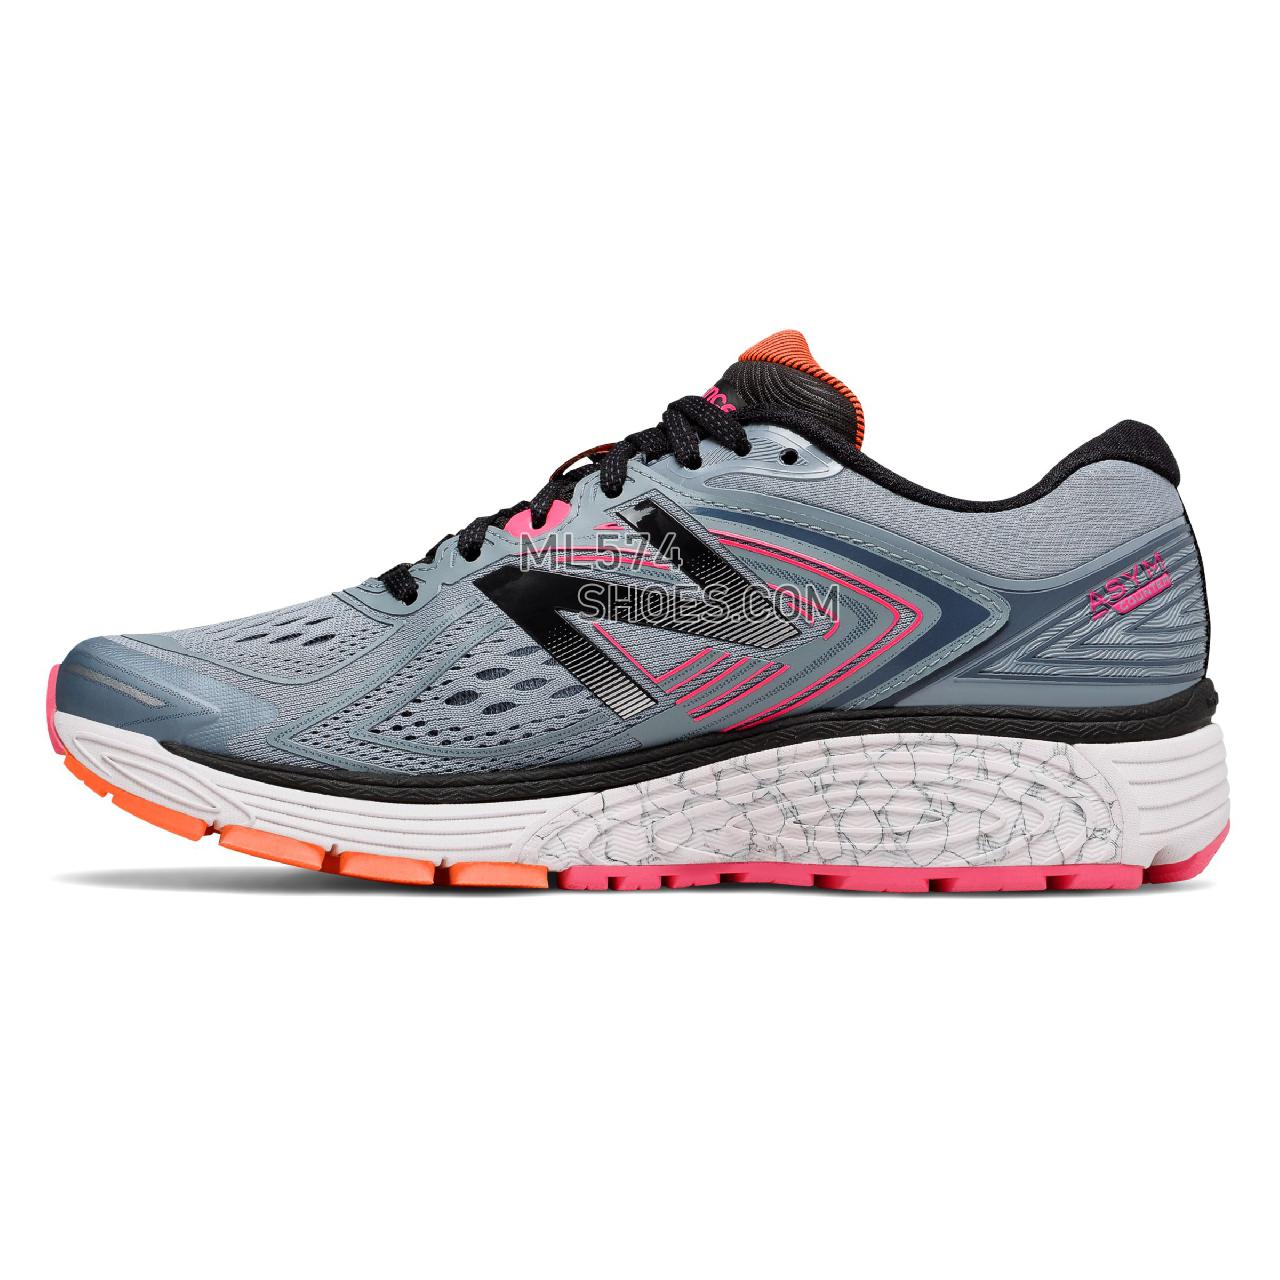 New Balance 860v8 - Women's 860 - Running Reflection with Alpha Pink and Black - W860GP8